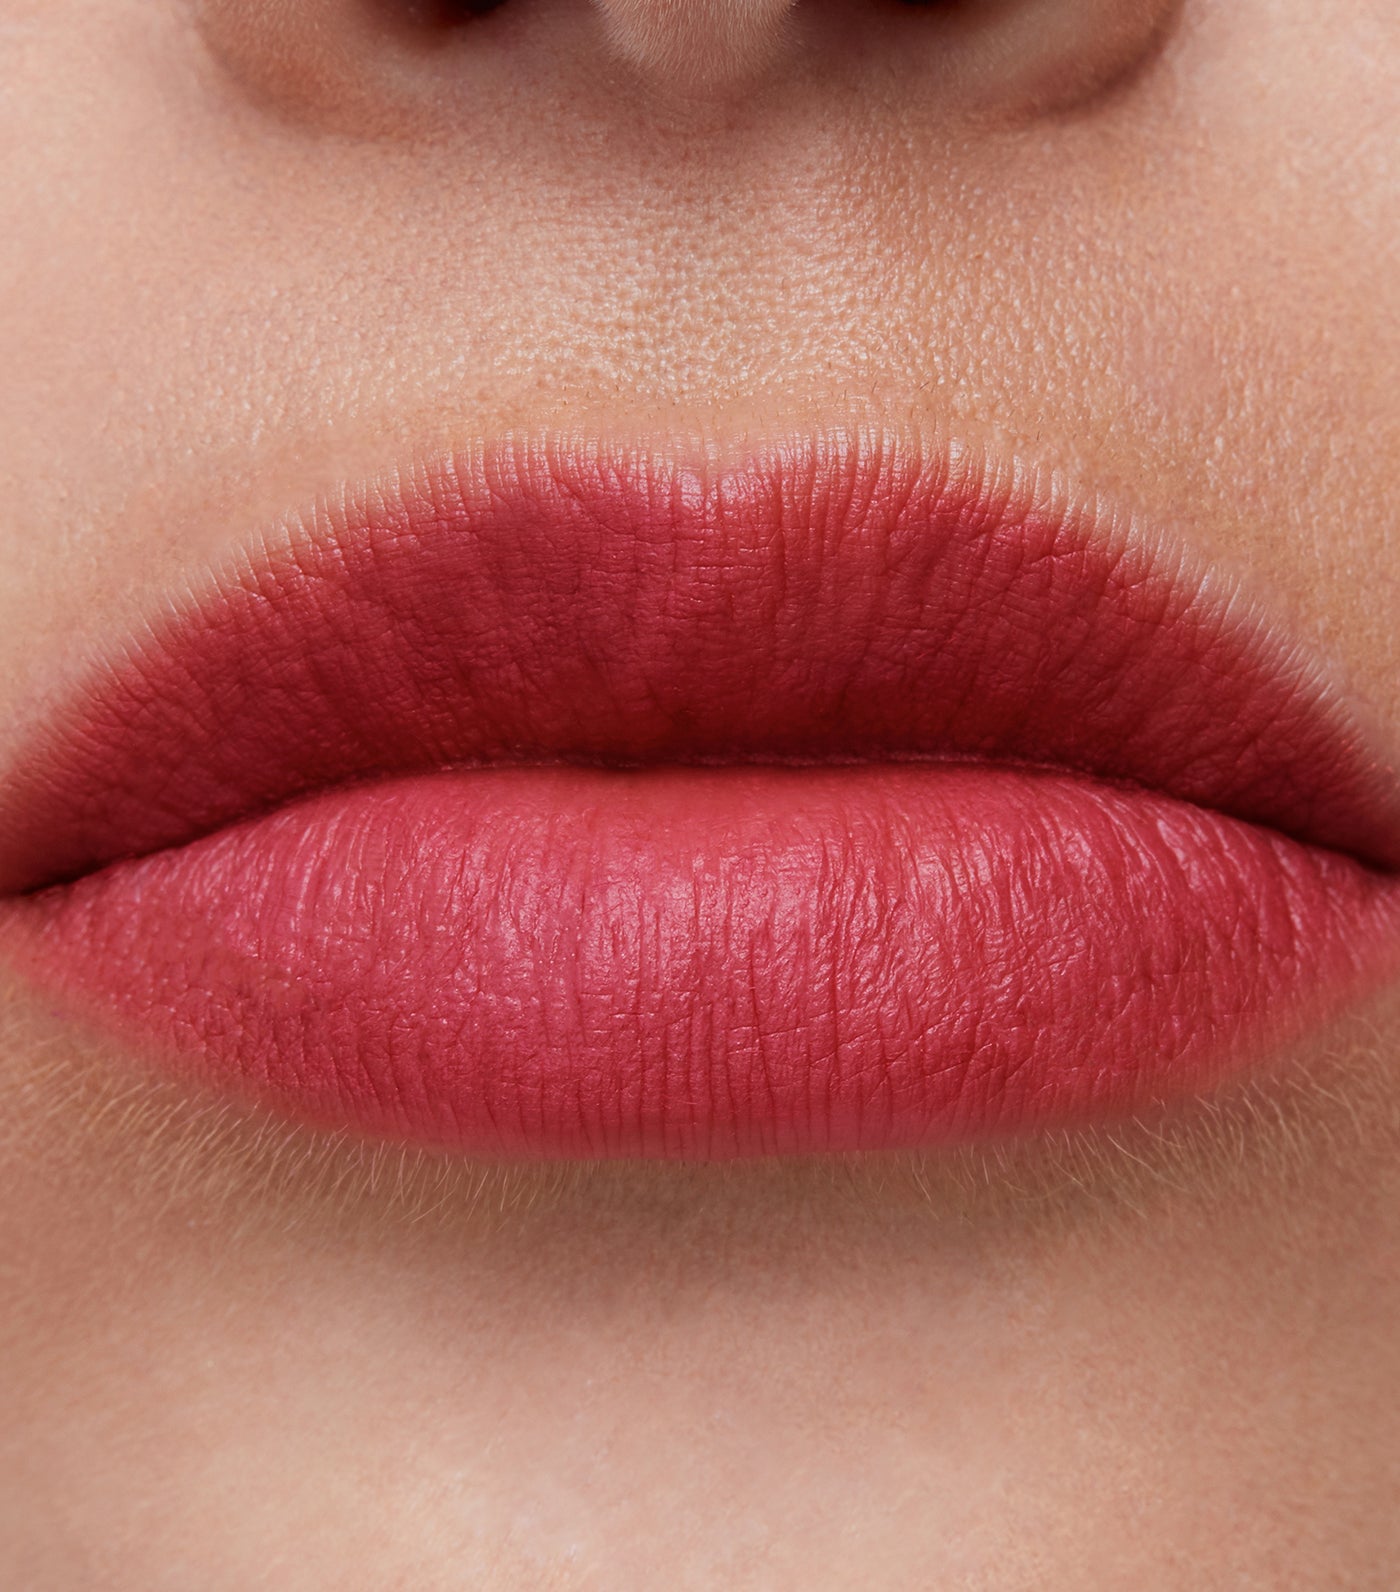 Stay All Day® Sheer Liquid Lipstick